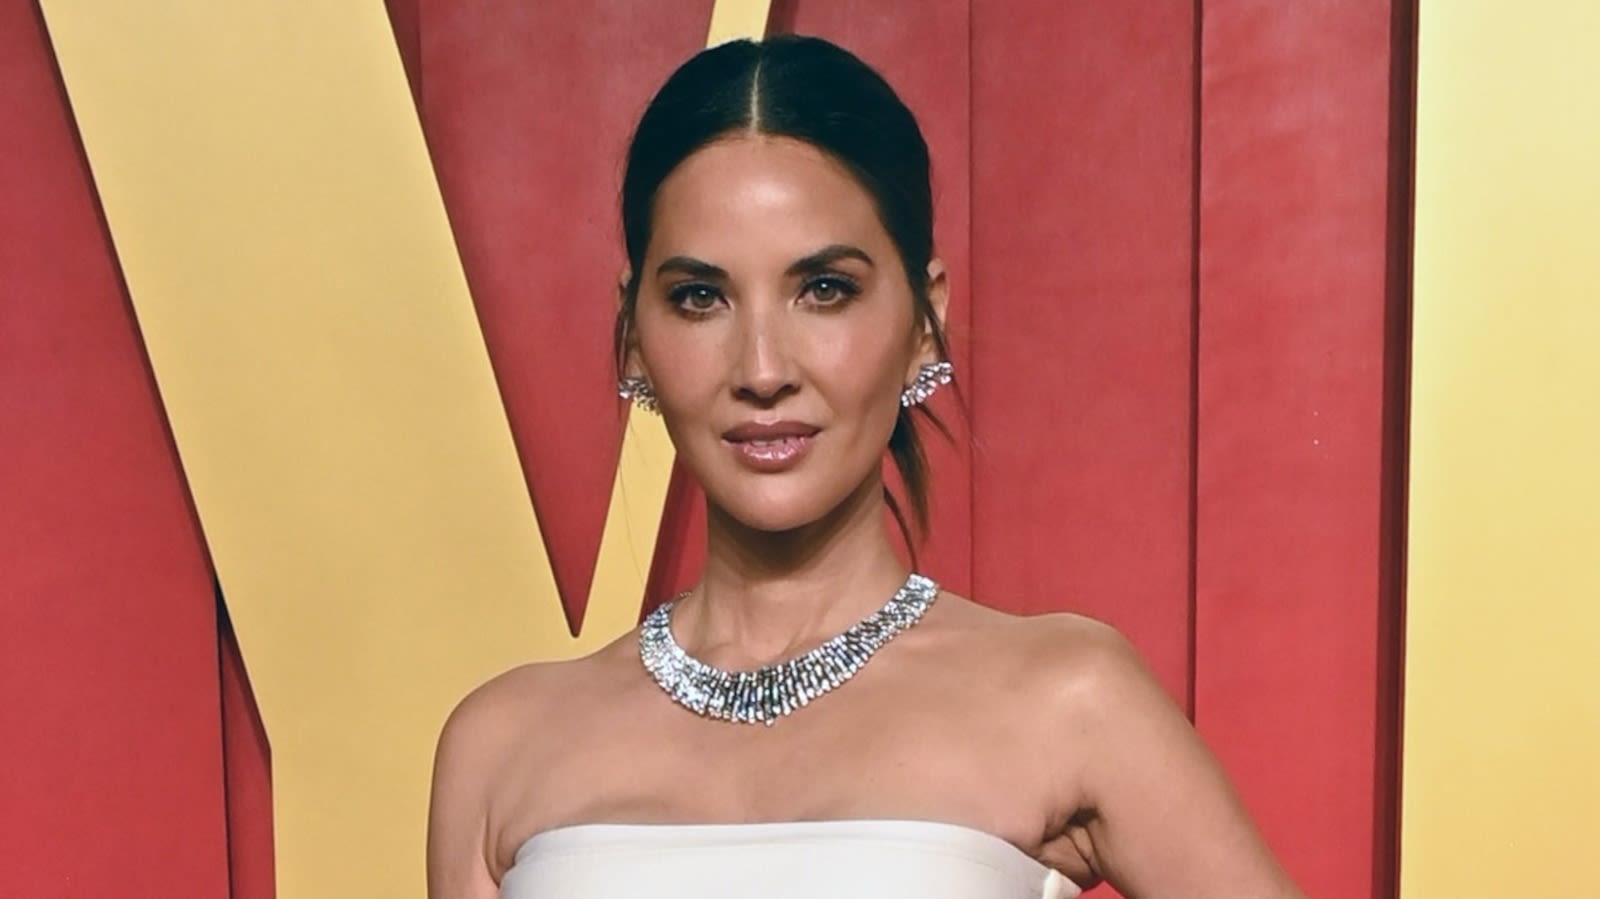 Olivia Munn reveals she had a hysterectomy after breast cancer diagnosis